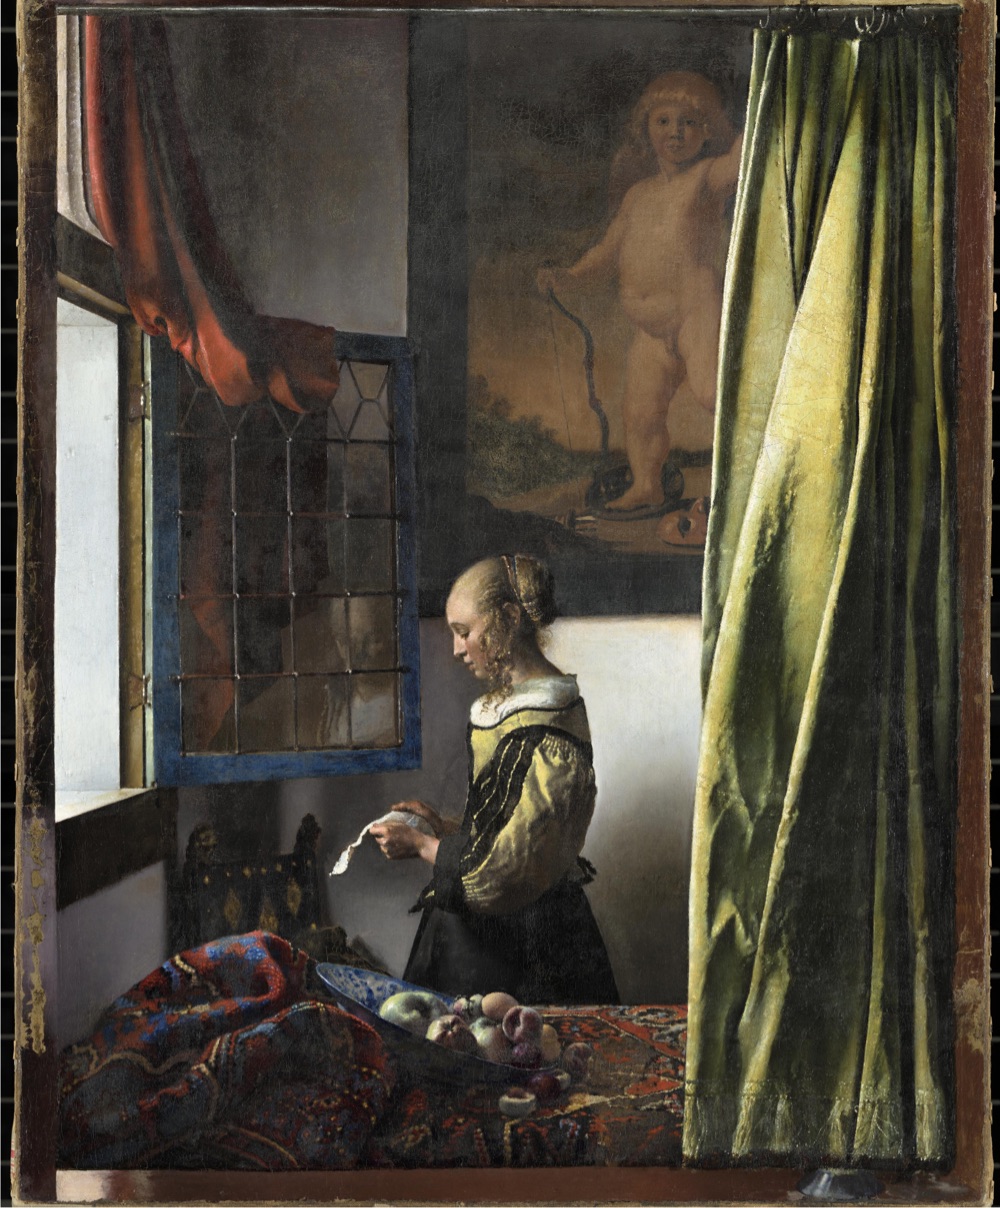 Johannes Vermeer's painting, Girl Reading a Letter at an Open Window